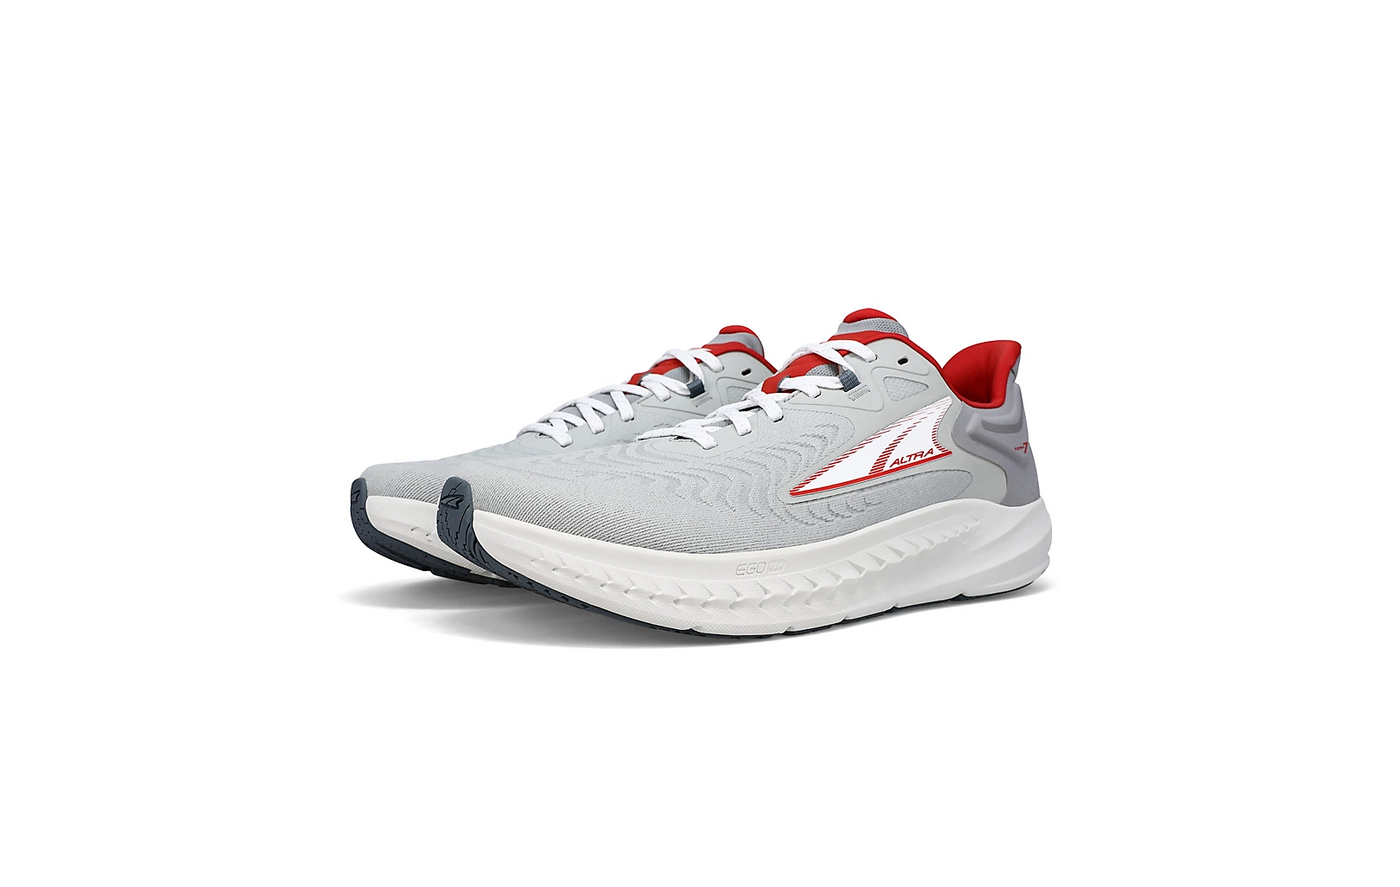 ALTRA MENS TORIN 7 - GRAY/RED